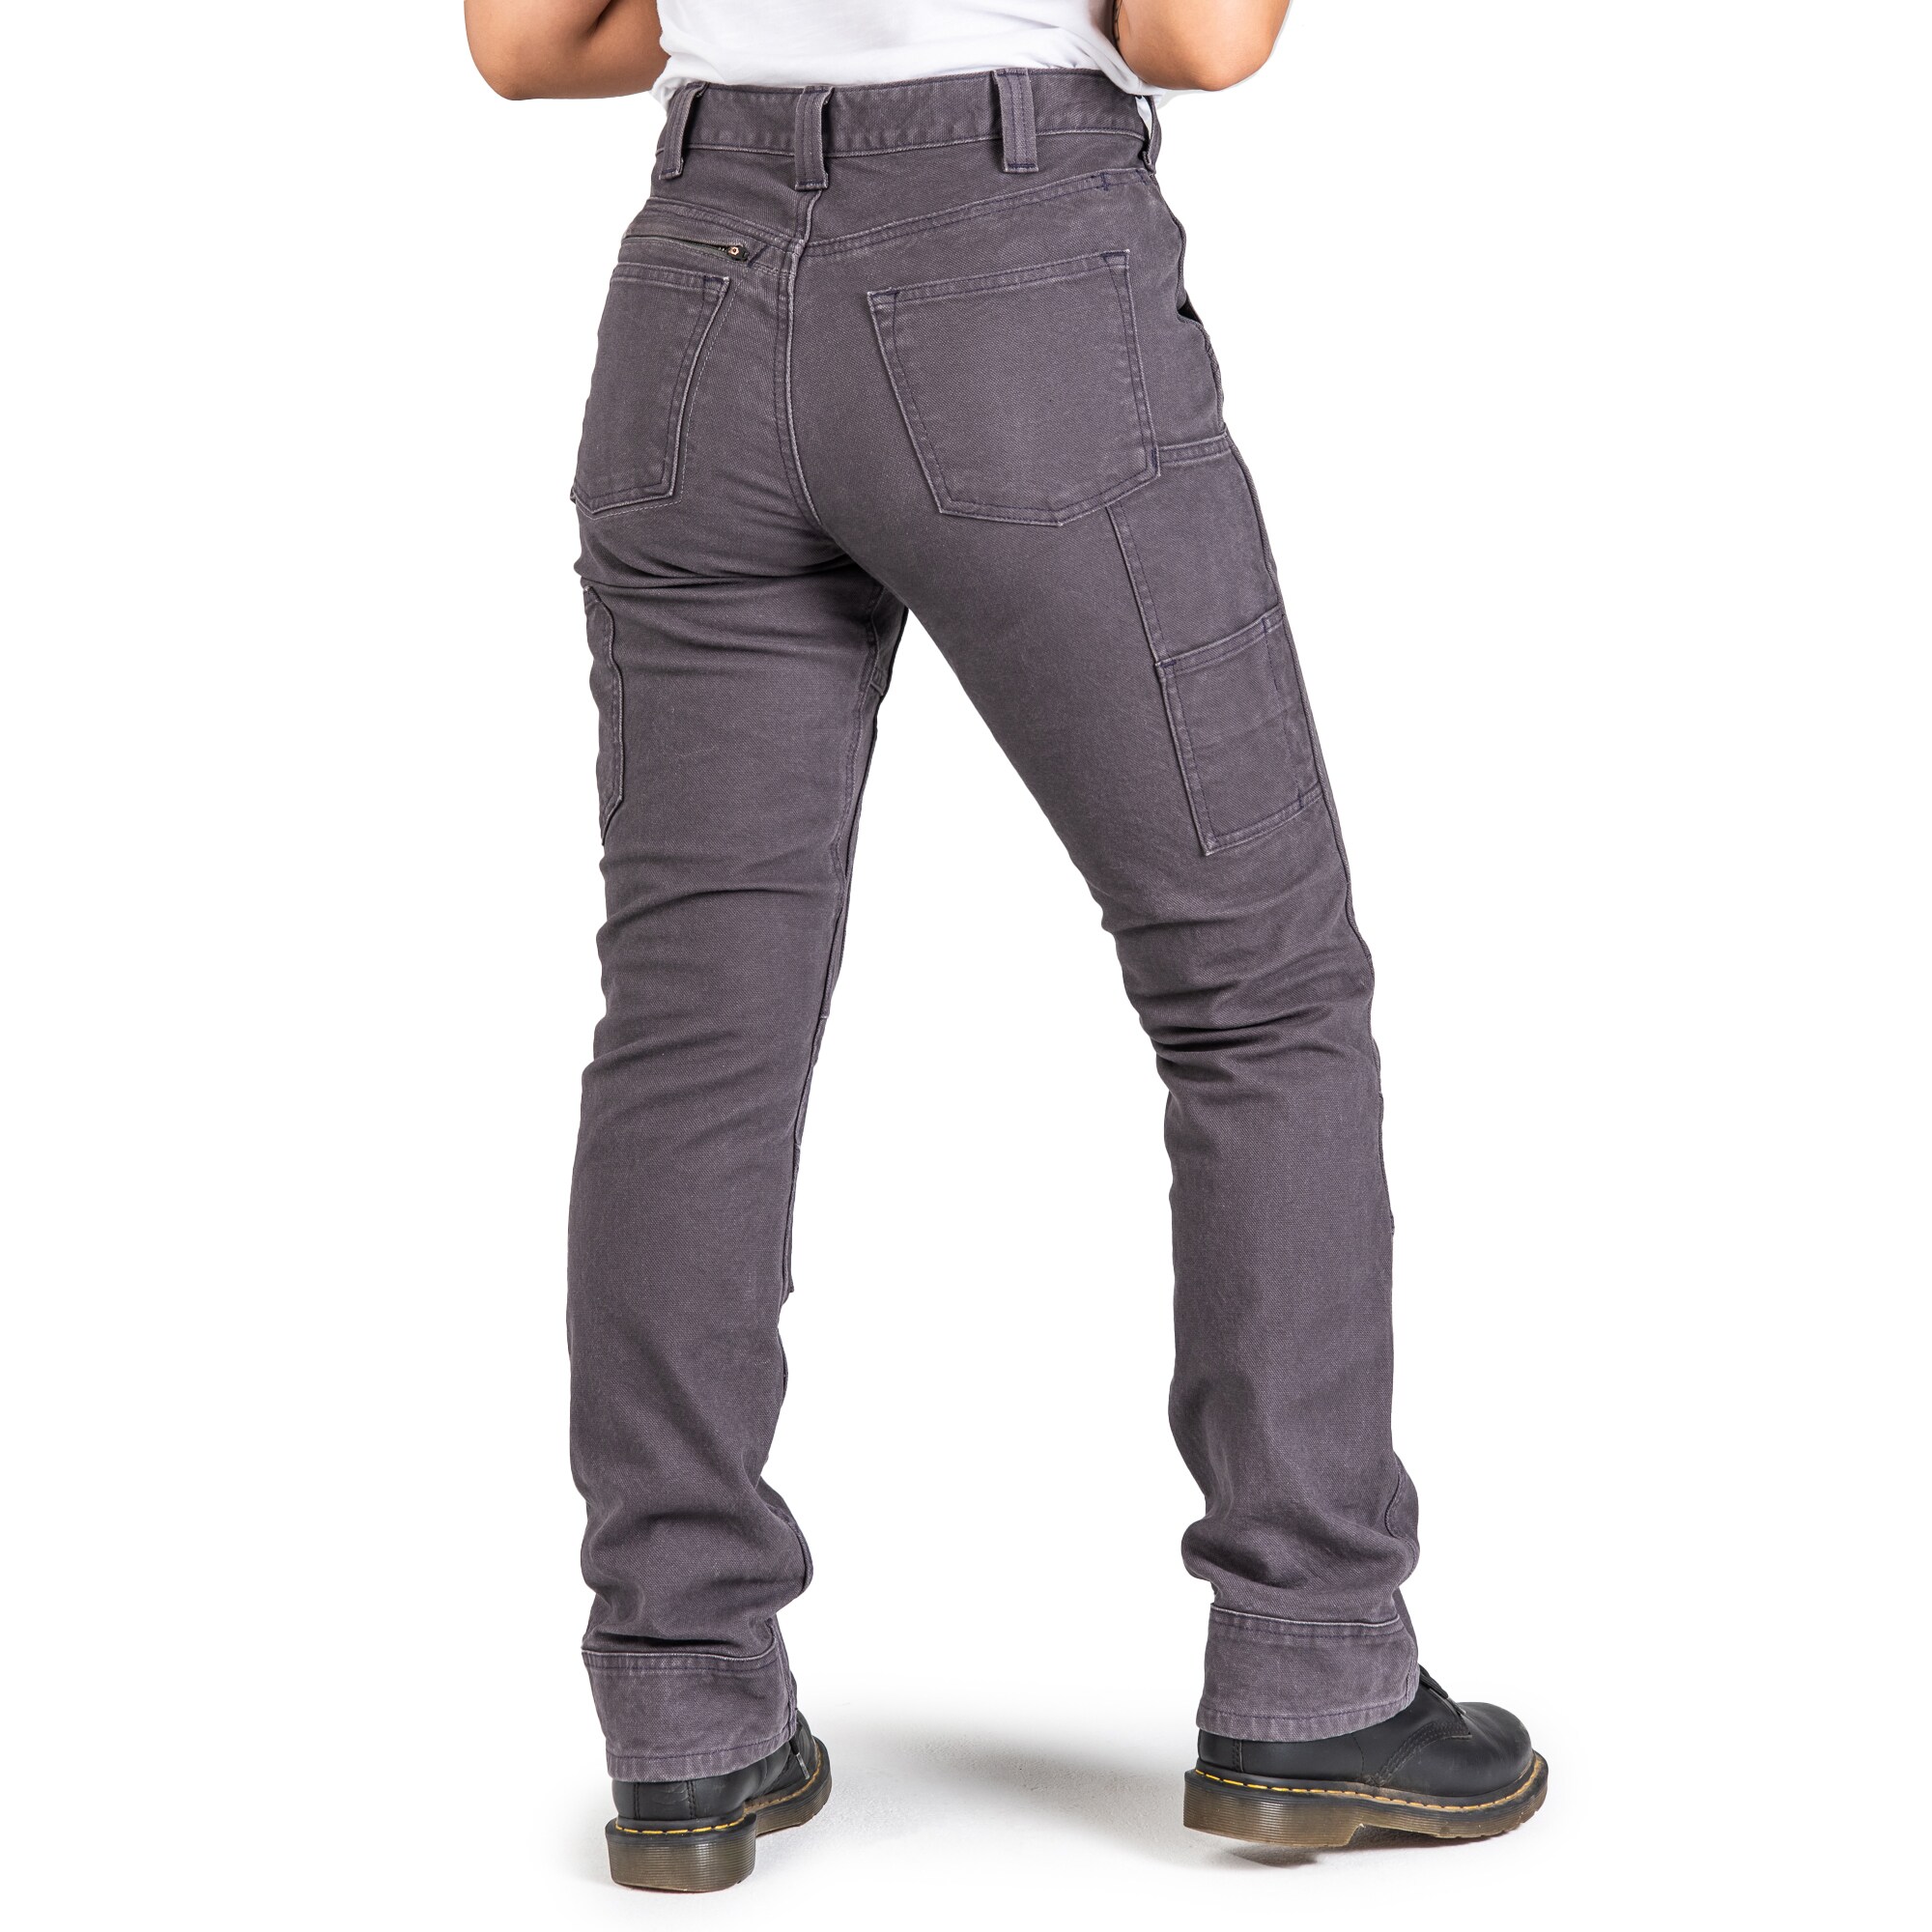 Dovetail Workwear Women's Grey Canvas Work Pants (14 X 30) in the